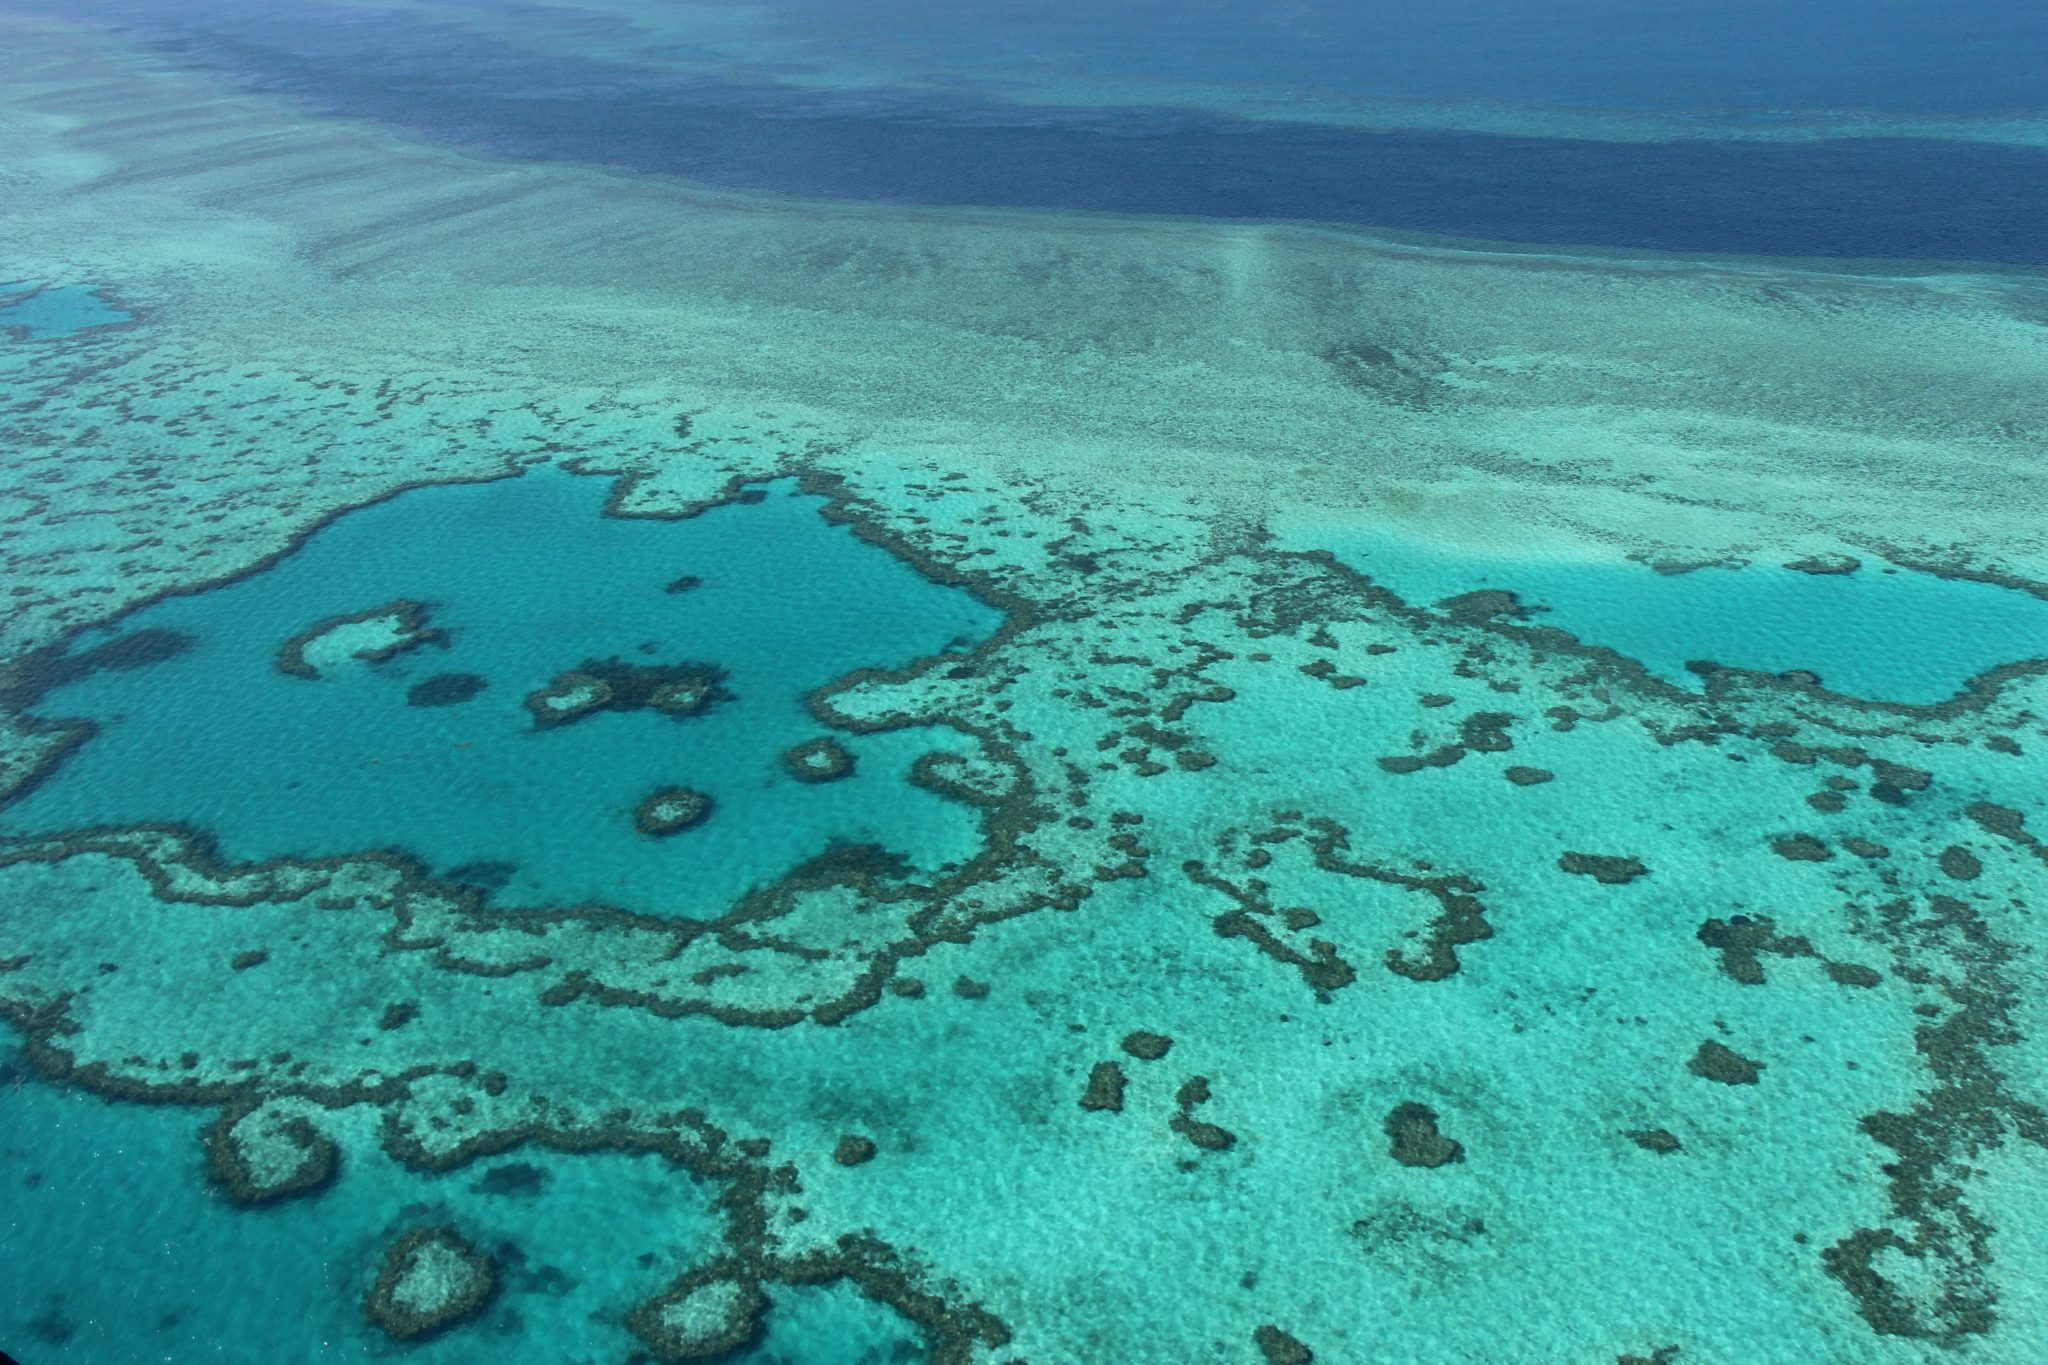 (FILES) This photo taken on November 20, 2014 shows an aerial view of the Great Barrier Reef off the coast of the Whitsunday Islands, along the central coast of Queensland. The plan to rescue Australia's Great Barrier Reef has been setback decades following last year's worst-ever bleaching event, a new report has found, while the reef's caretakers have cautioned the government to prepare for the likelihood of further bleaching this year. / AFP PHOTO / SARAH LAI